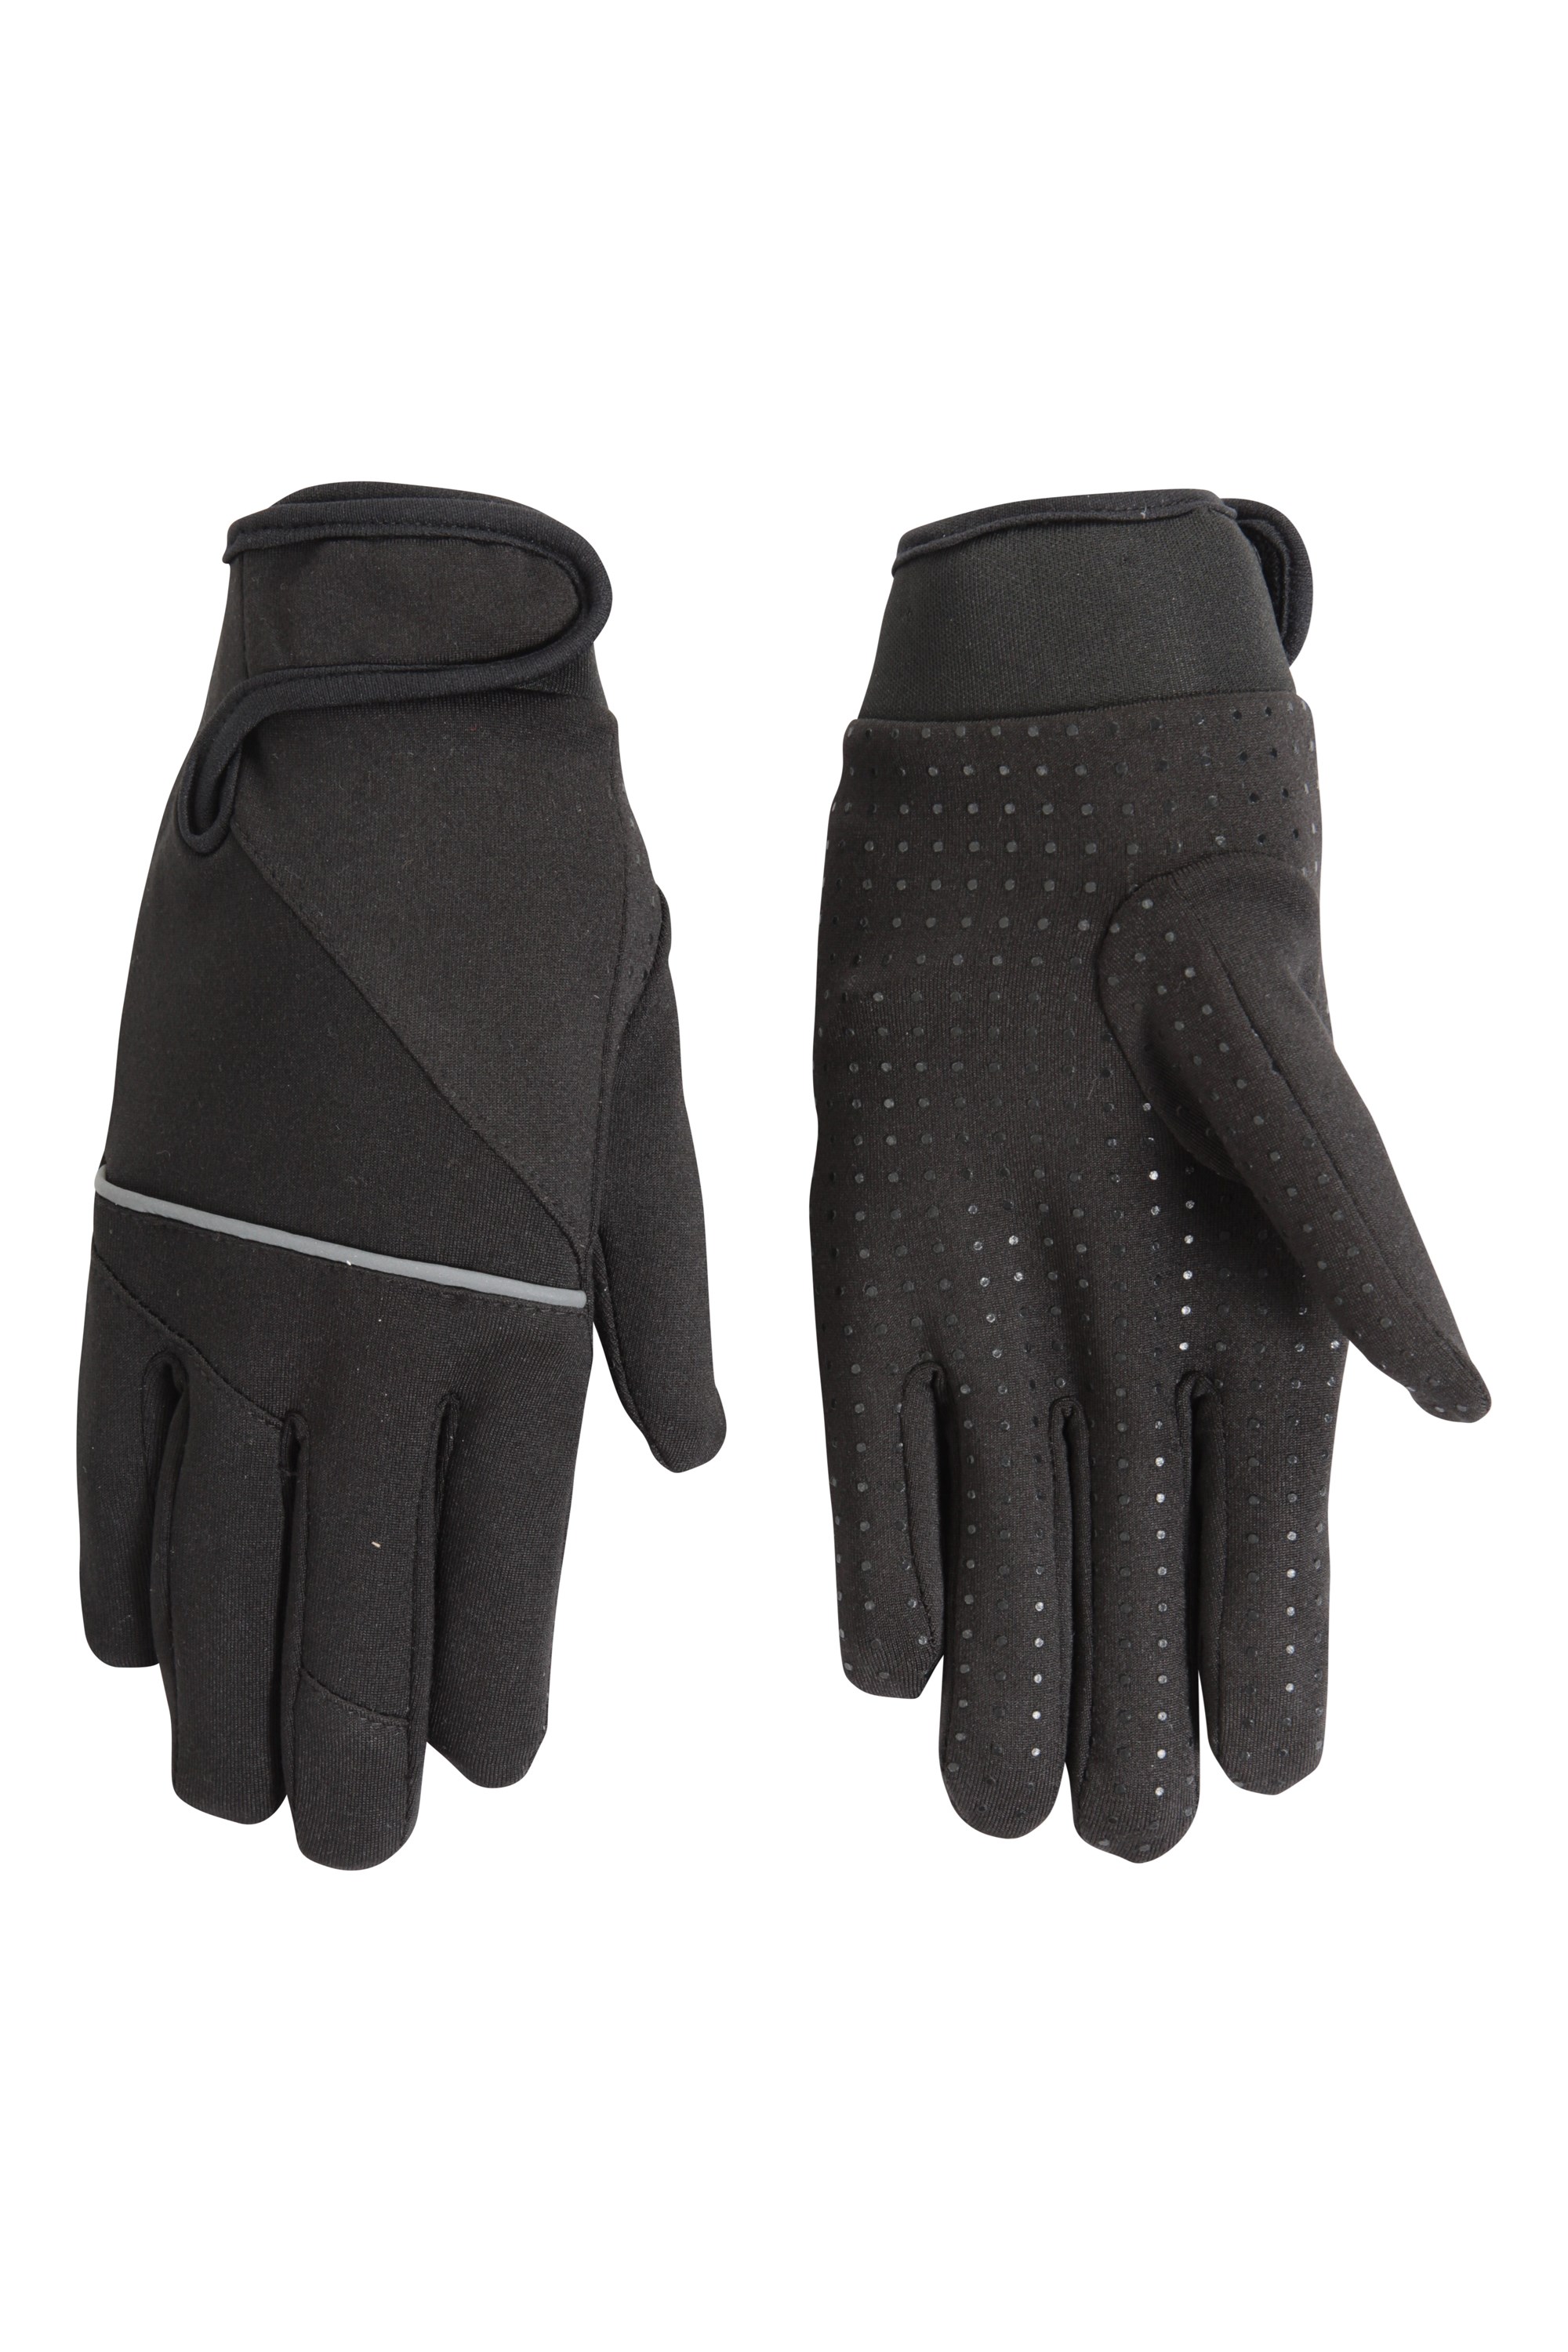 Pace Womens Reflective Running Gloves - Black